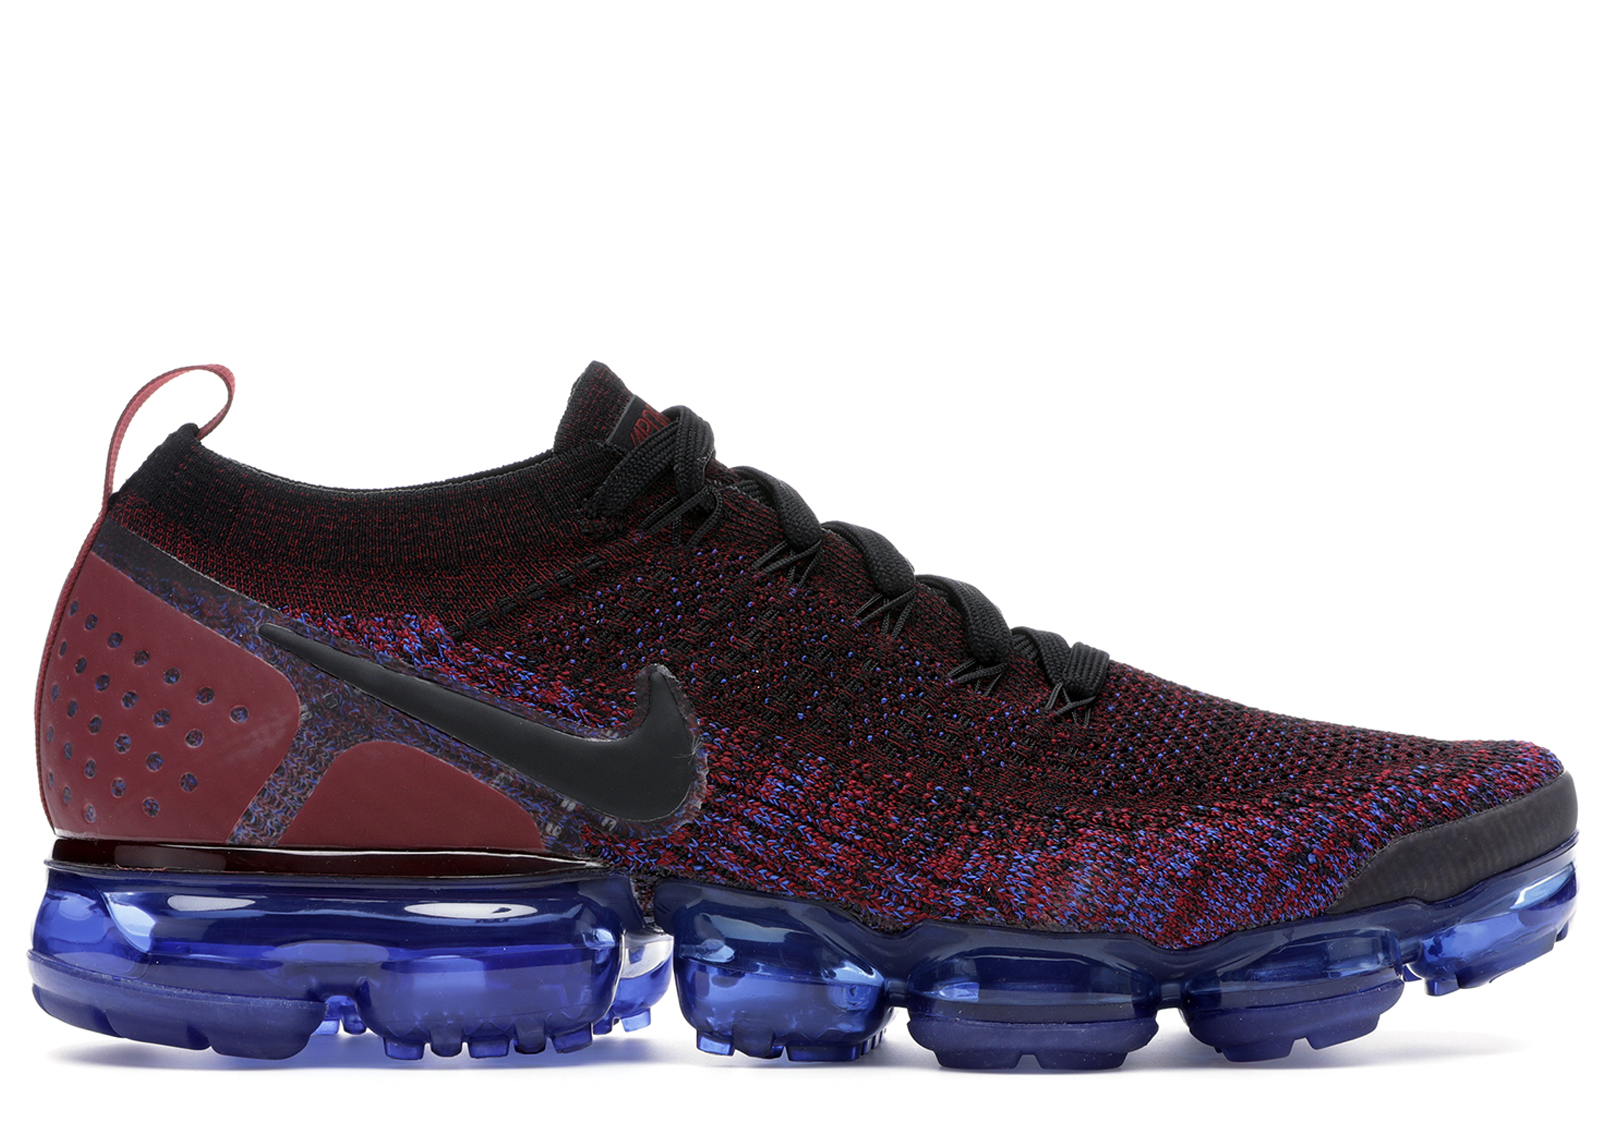 vapormax blue and red